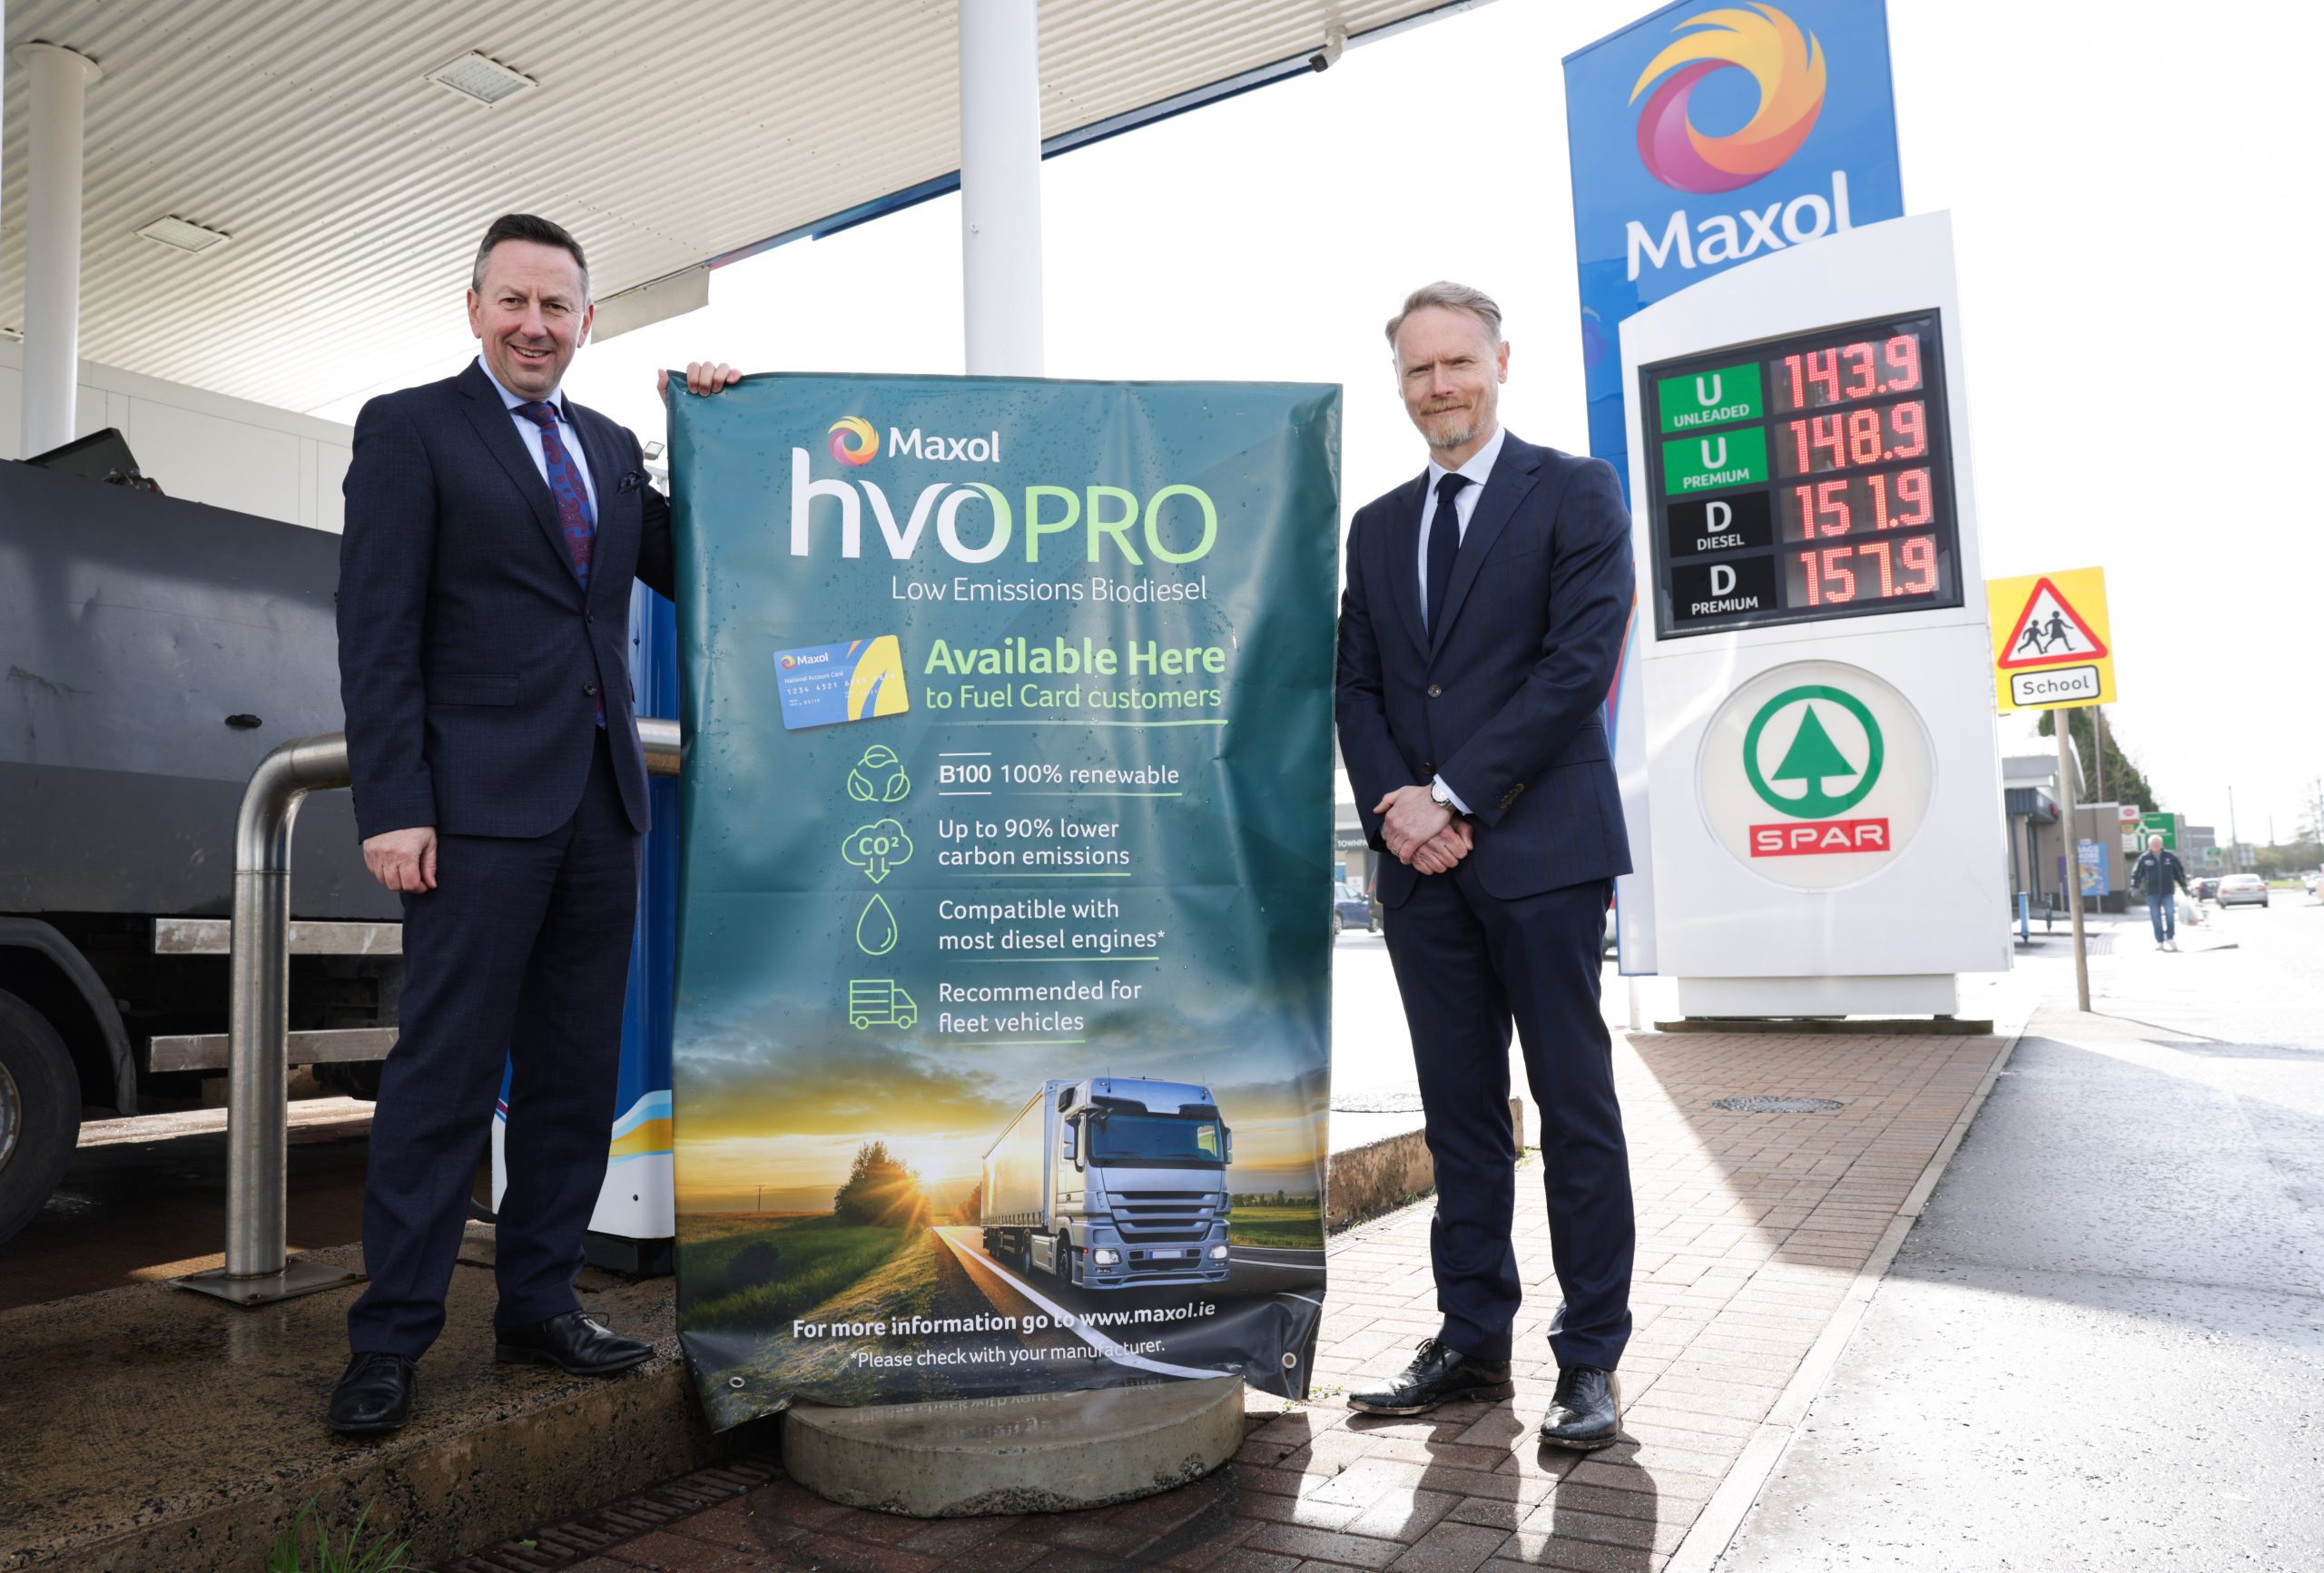 Maxol announces roll out of hvoPRO, its low emissions Biodiesel, in Northern Ireland